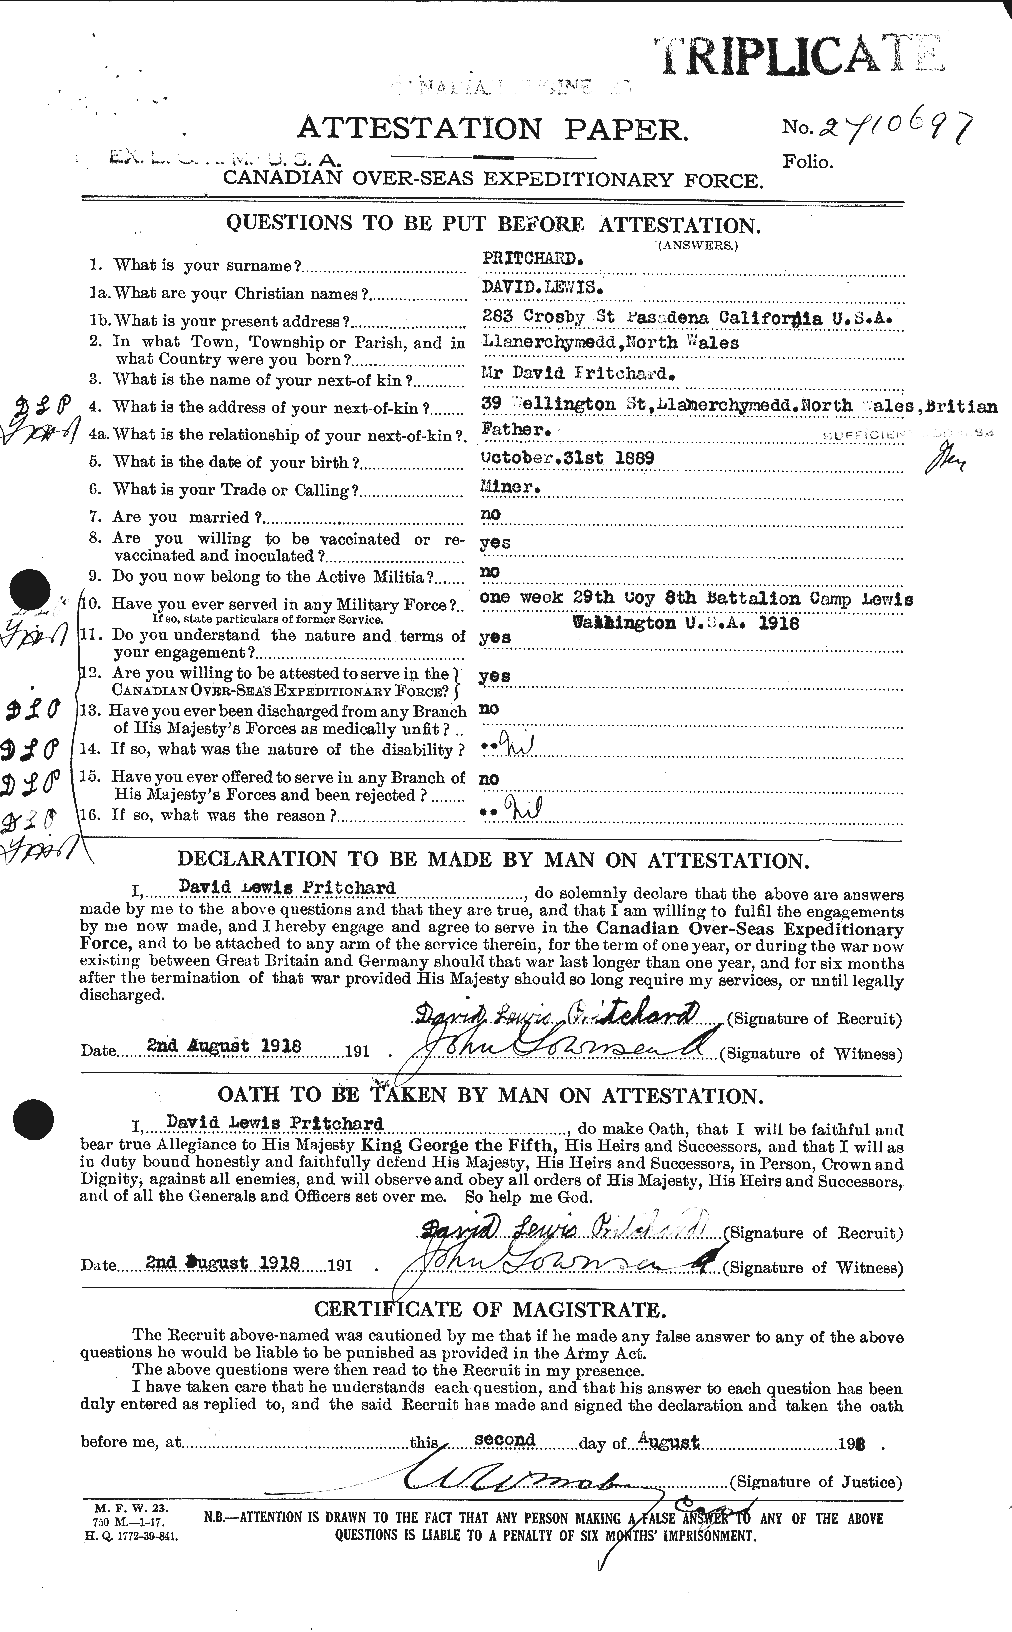 Personnel Records of the First World War - CEF 588503a